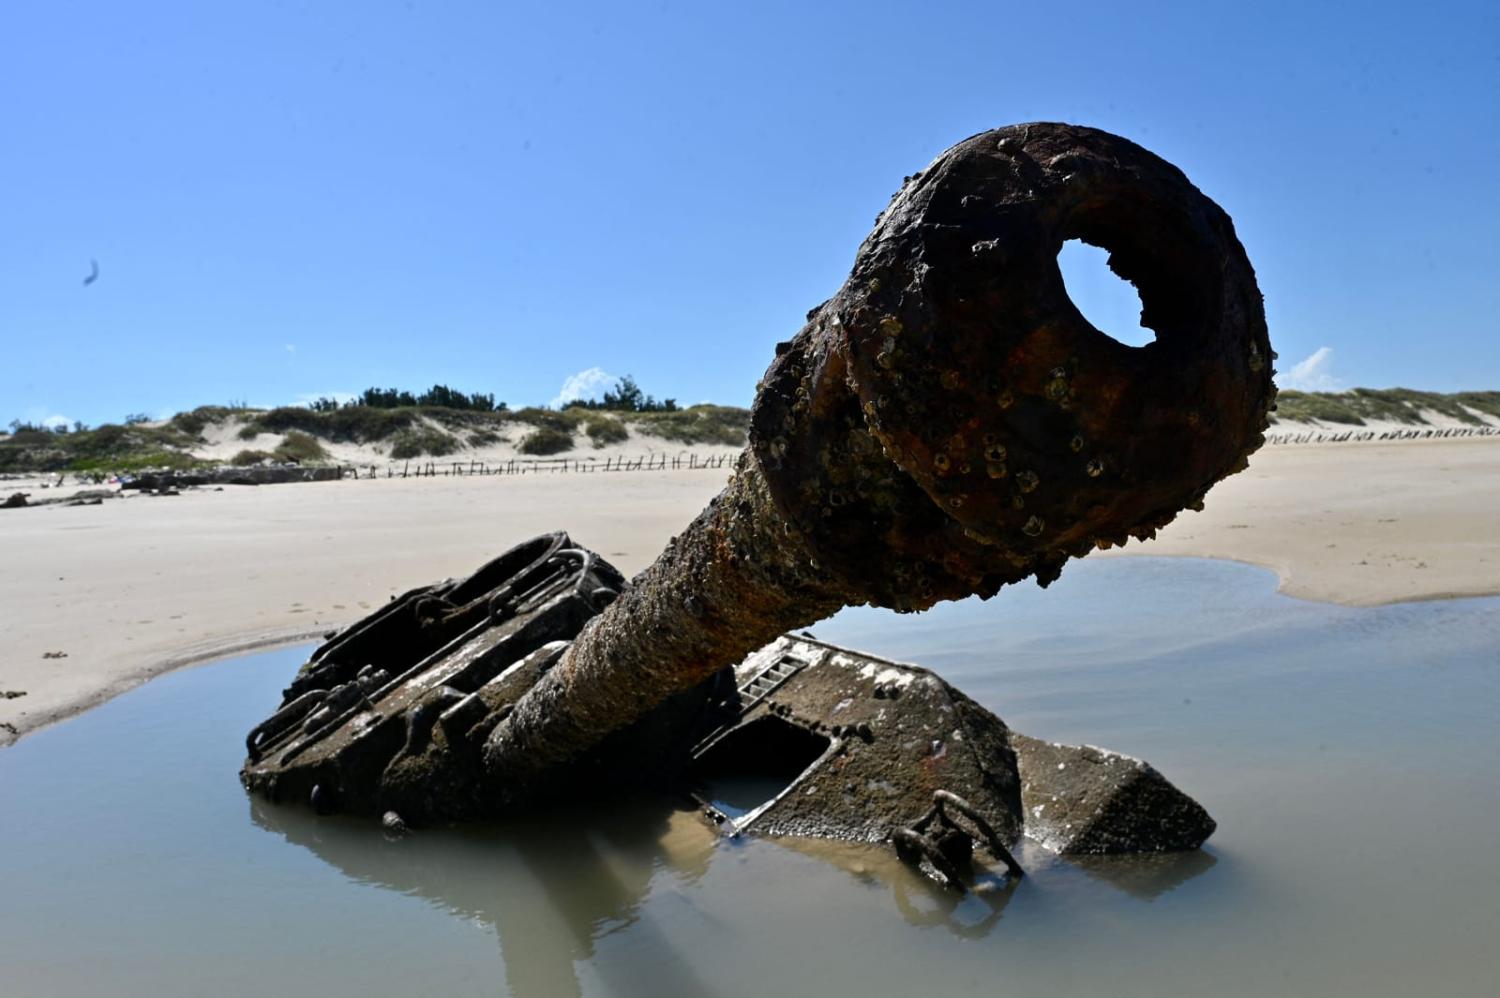 Wreckage of an old tank at Ou Cuo Sandy Beach on Taiwan's Kinmen islands, which lie just 3.2 kilometres from the mainland China coast (Sam Yeh/AFP via Getty Images)